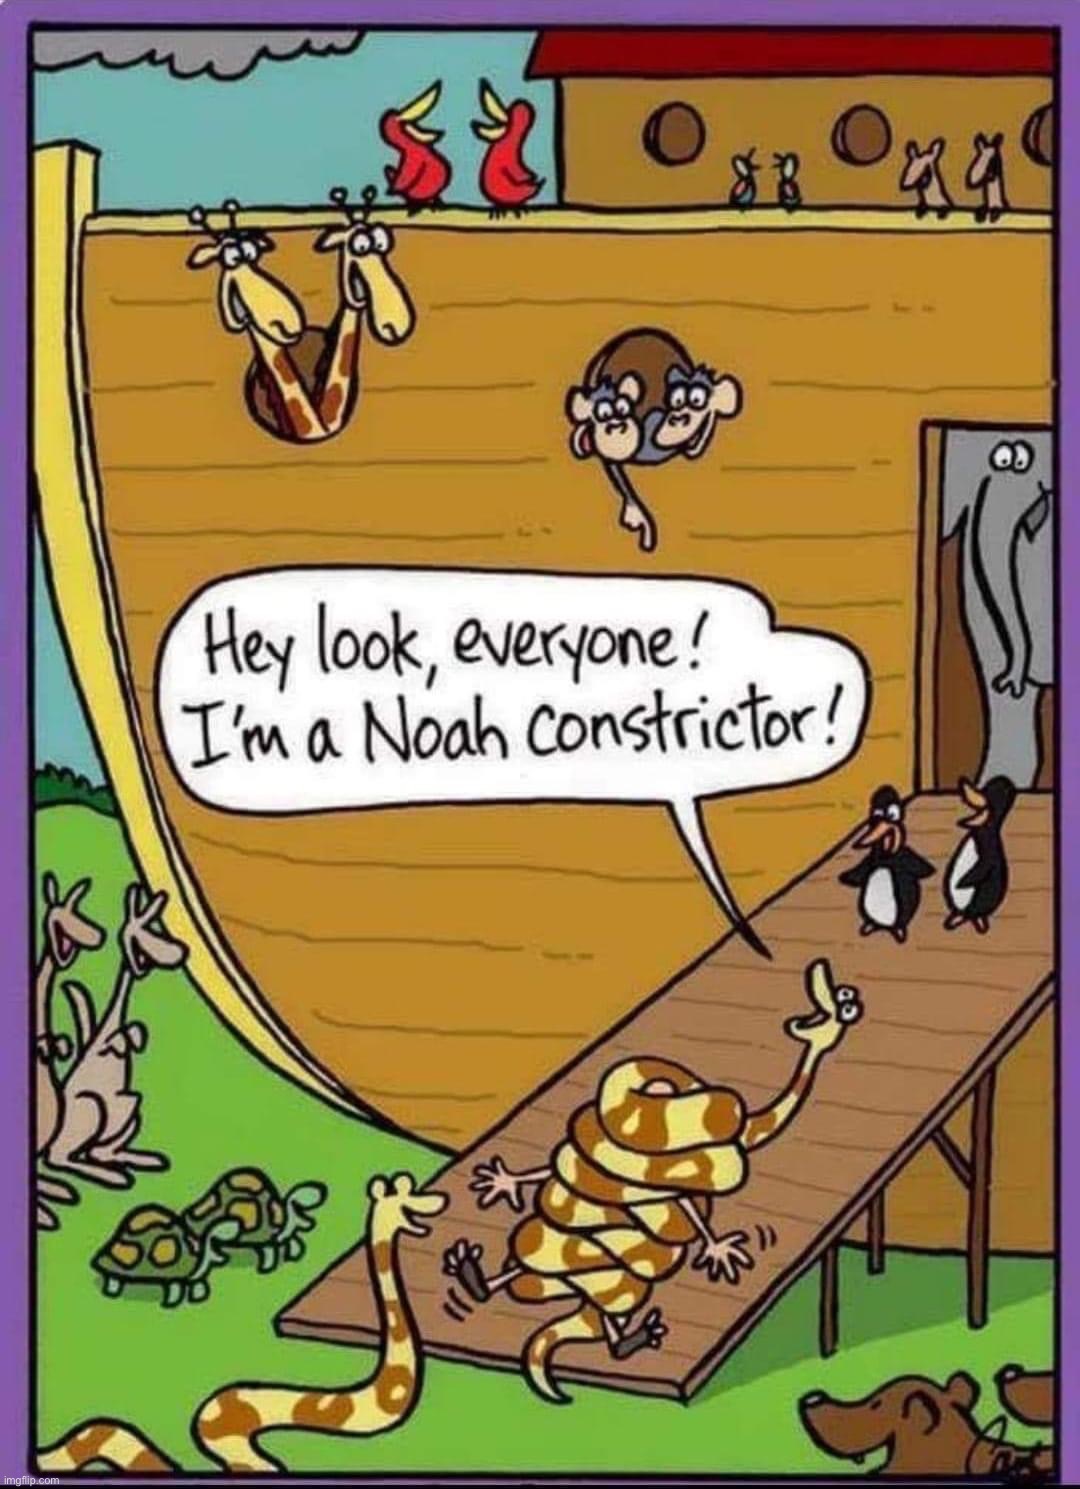 Noah constrictor | image tagged in noah constrictor | made w/ Imgflip meme maker